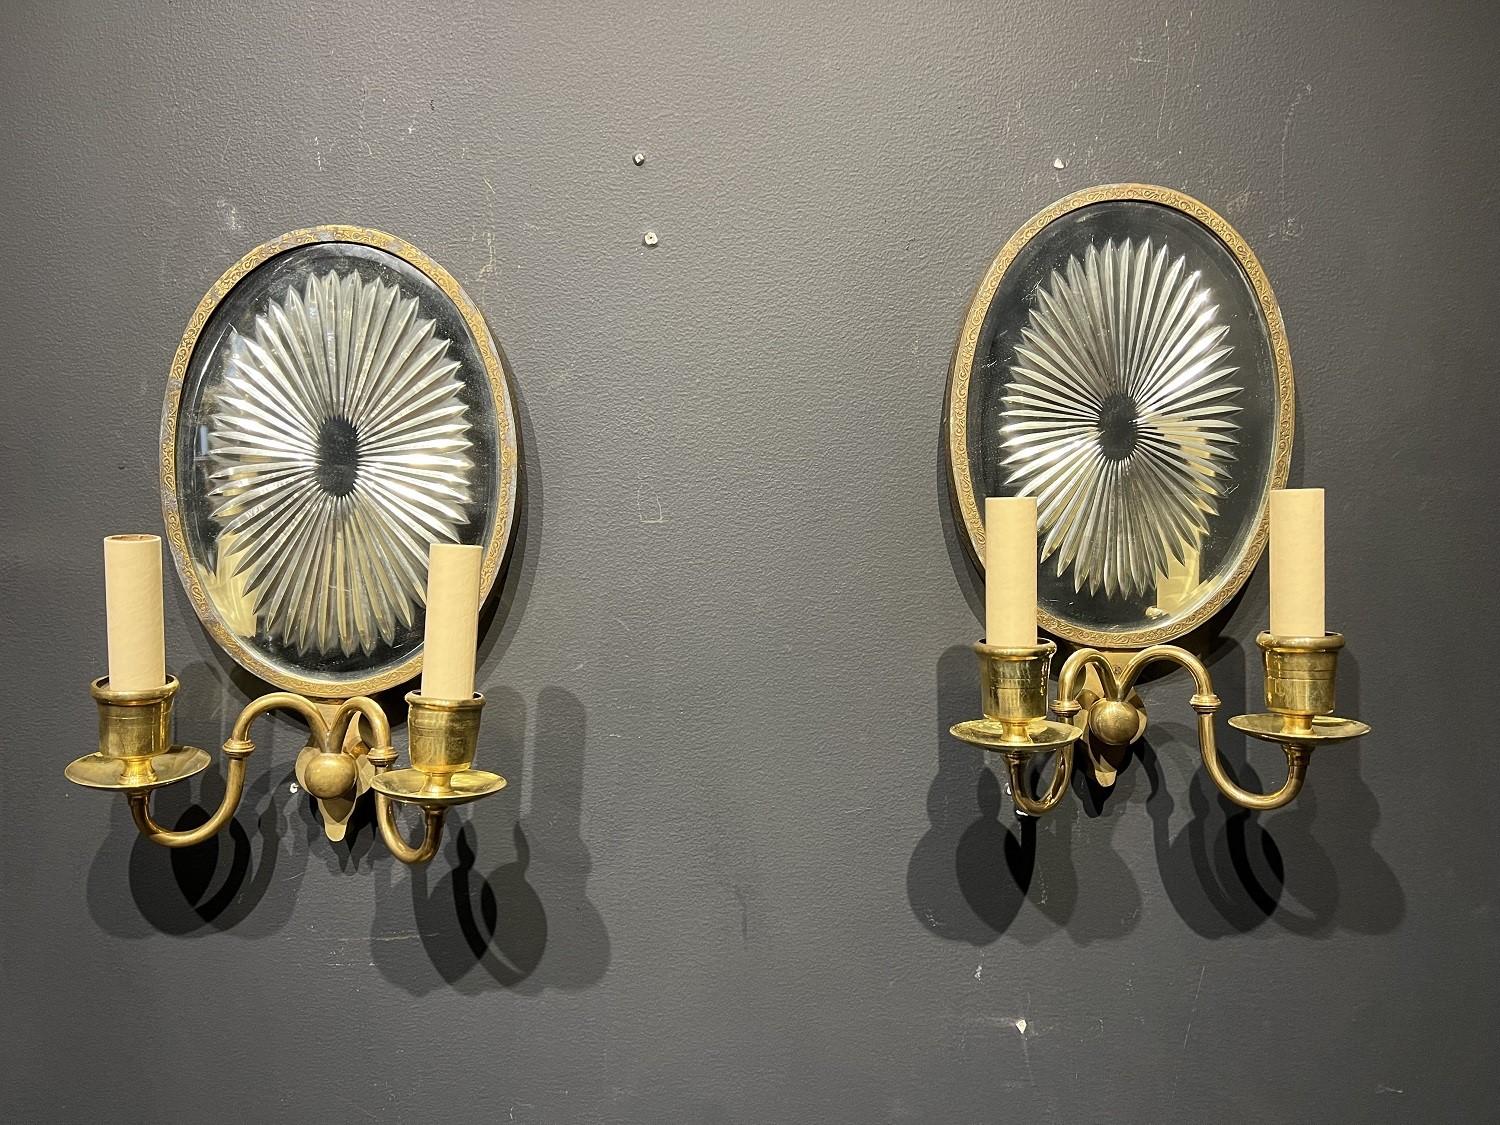 American Classical 1920's Caldwell Double Lights Sconces with Mirror Backplate For Sale